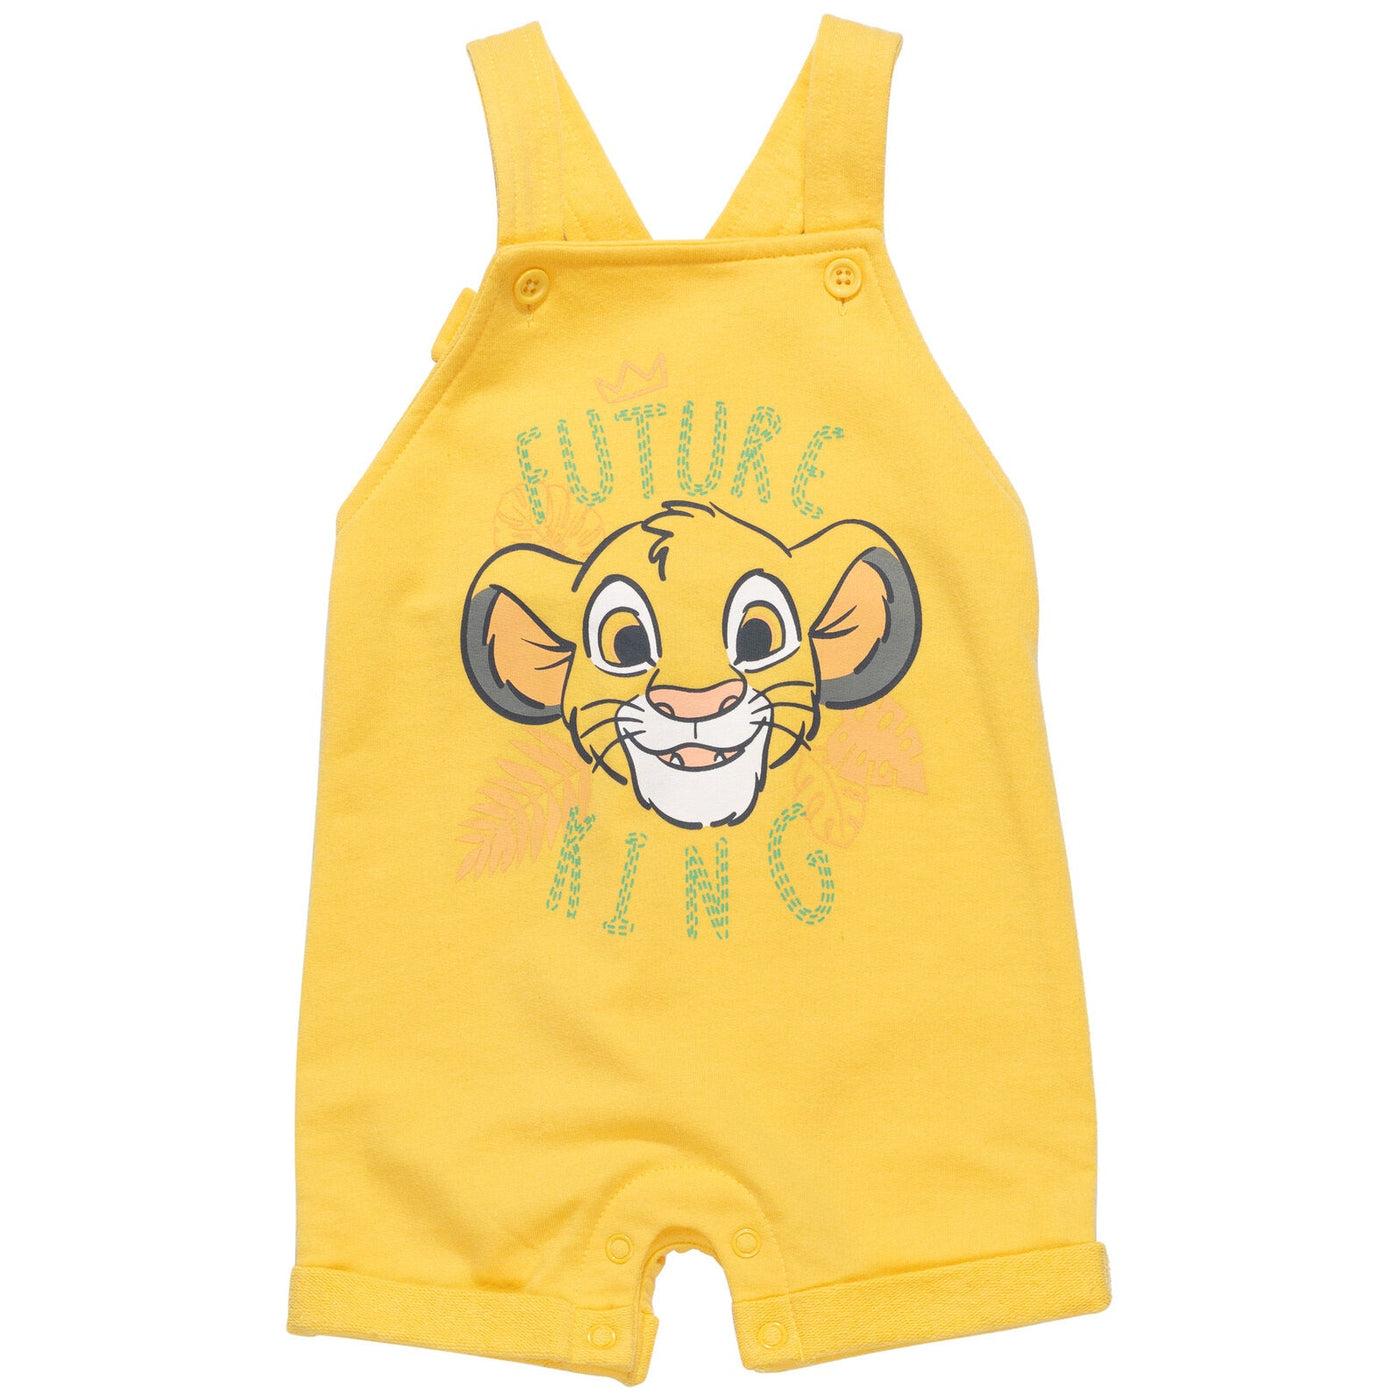 Disney Lion King Simba French Terry Short Overalls T-Shirt and Hat 3 Piece Outfit Set - imagikids